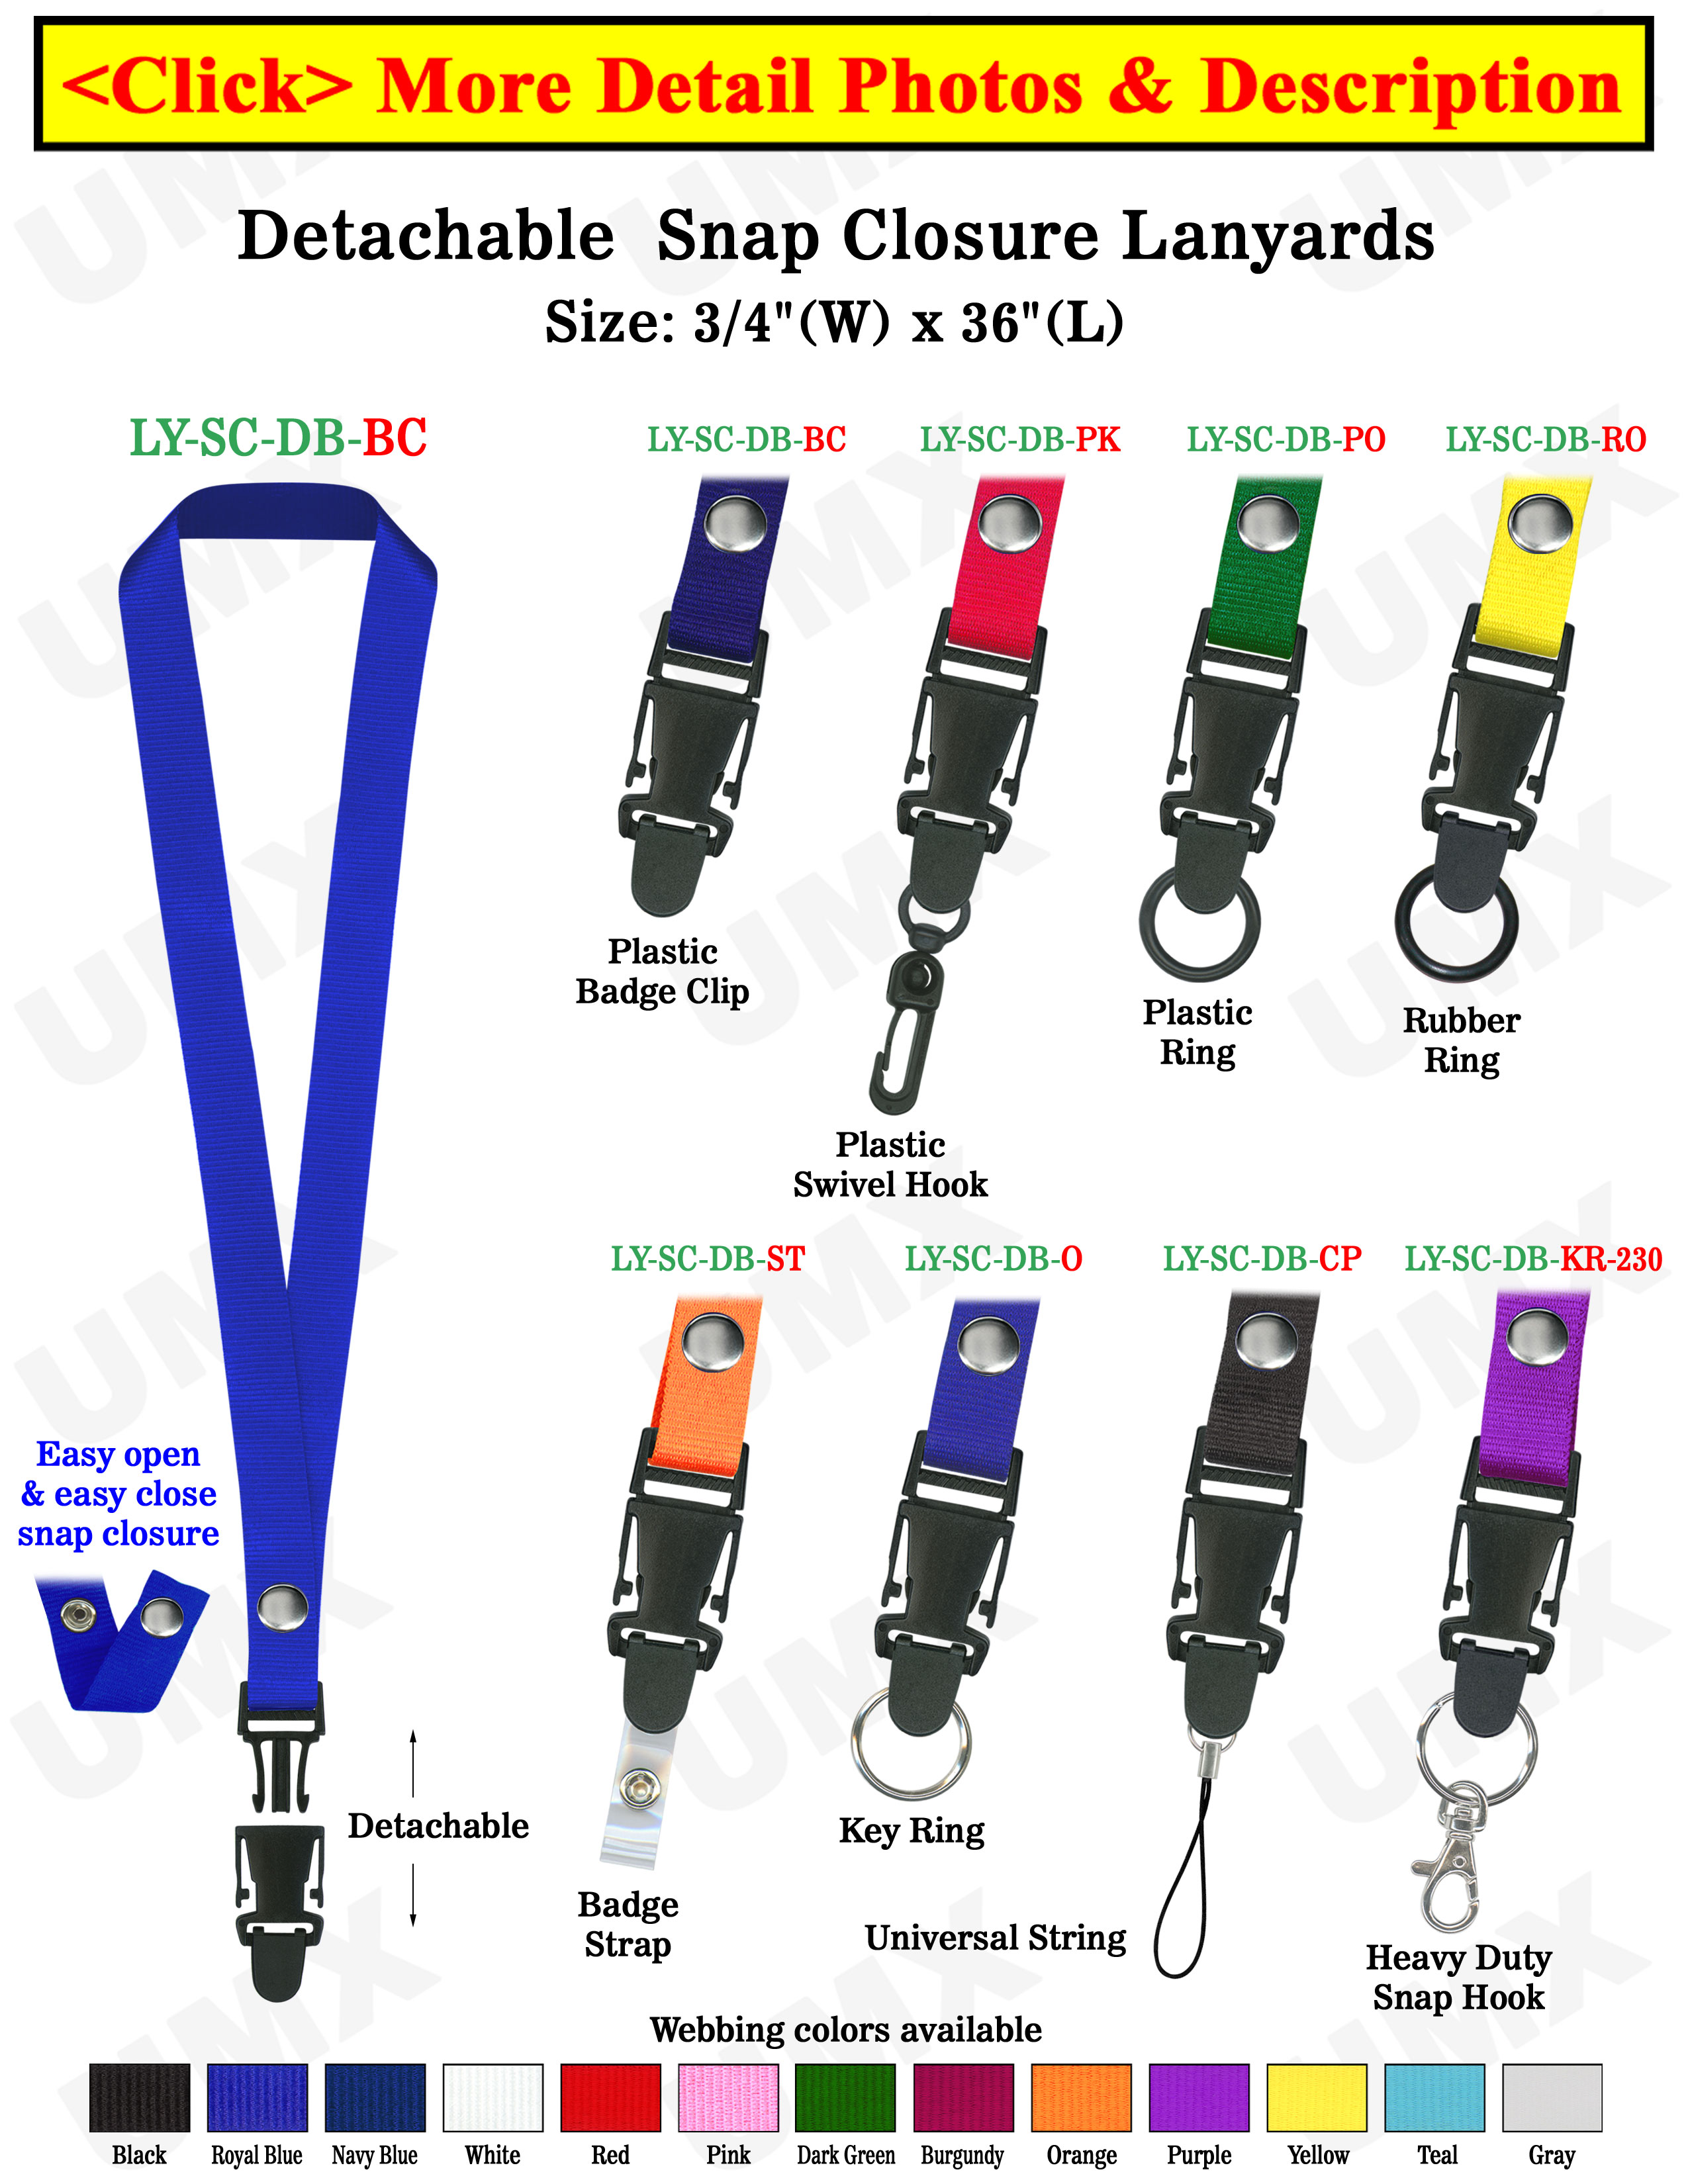 Detachable Lanyards: 3/4" Neck Straps: Snap Closure ID Card Holders